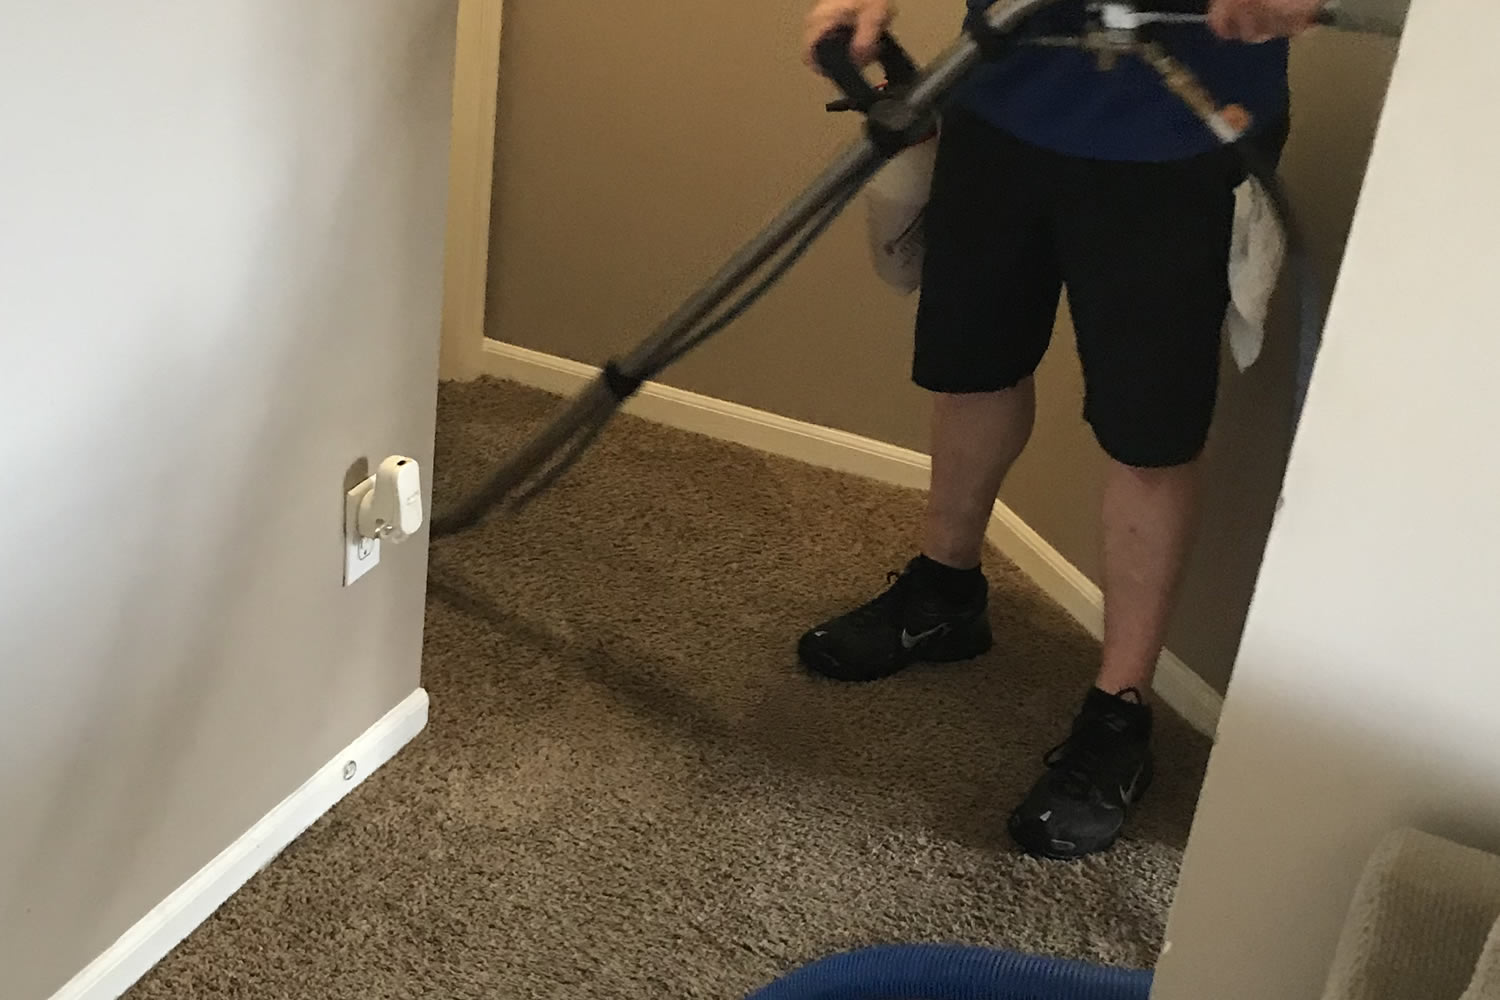 carolina-clean-pro-carpet-cleaning-upholstery-tile-grout-cleaning-hard-floor-hardwood-floor-cleaning-service-for-Garner-Raleigh-Cary-Clayton-Smithfield-Johnston-County-Wake-County-NC-19